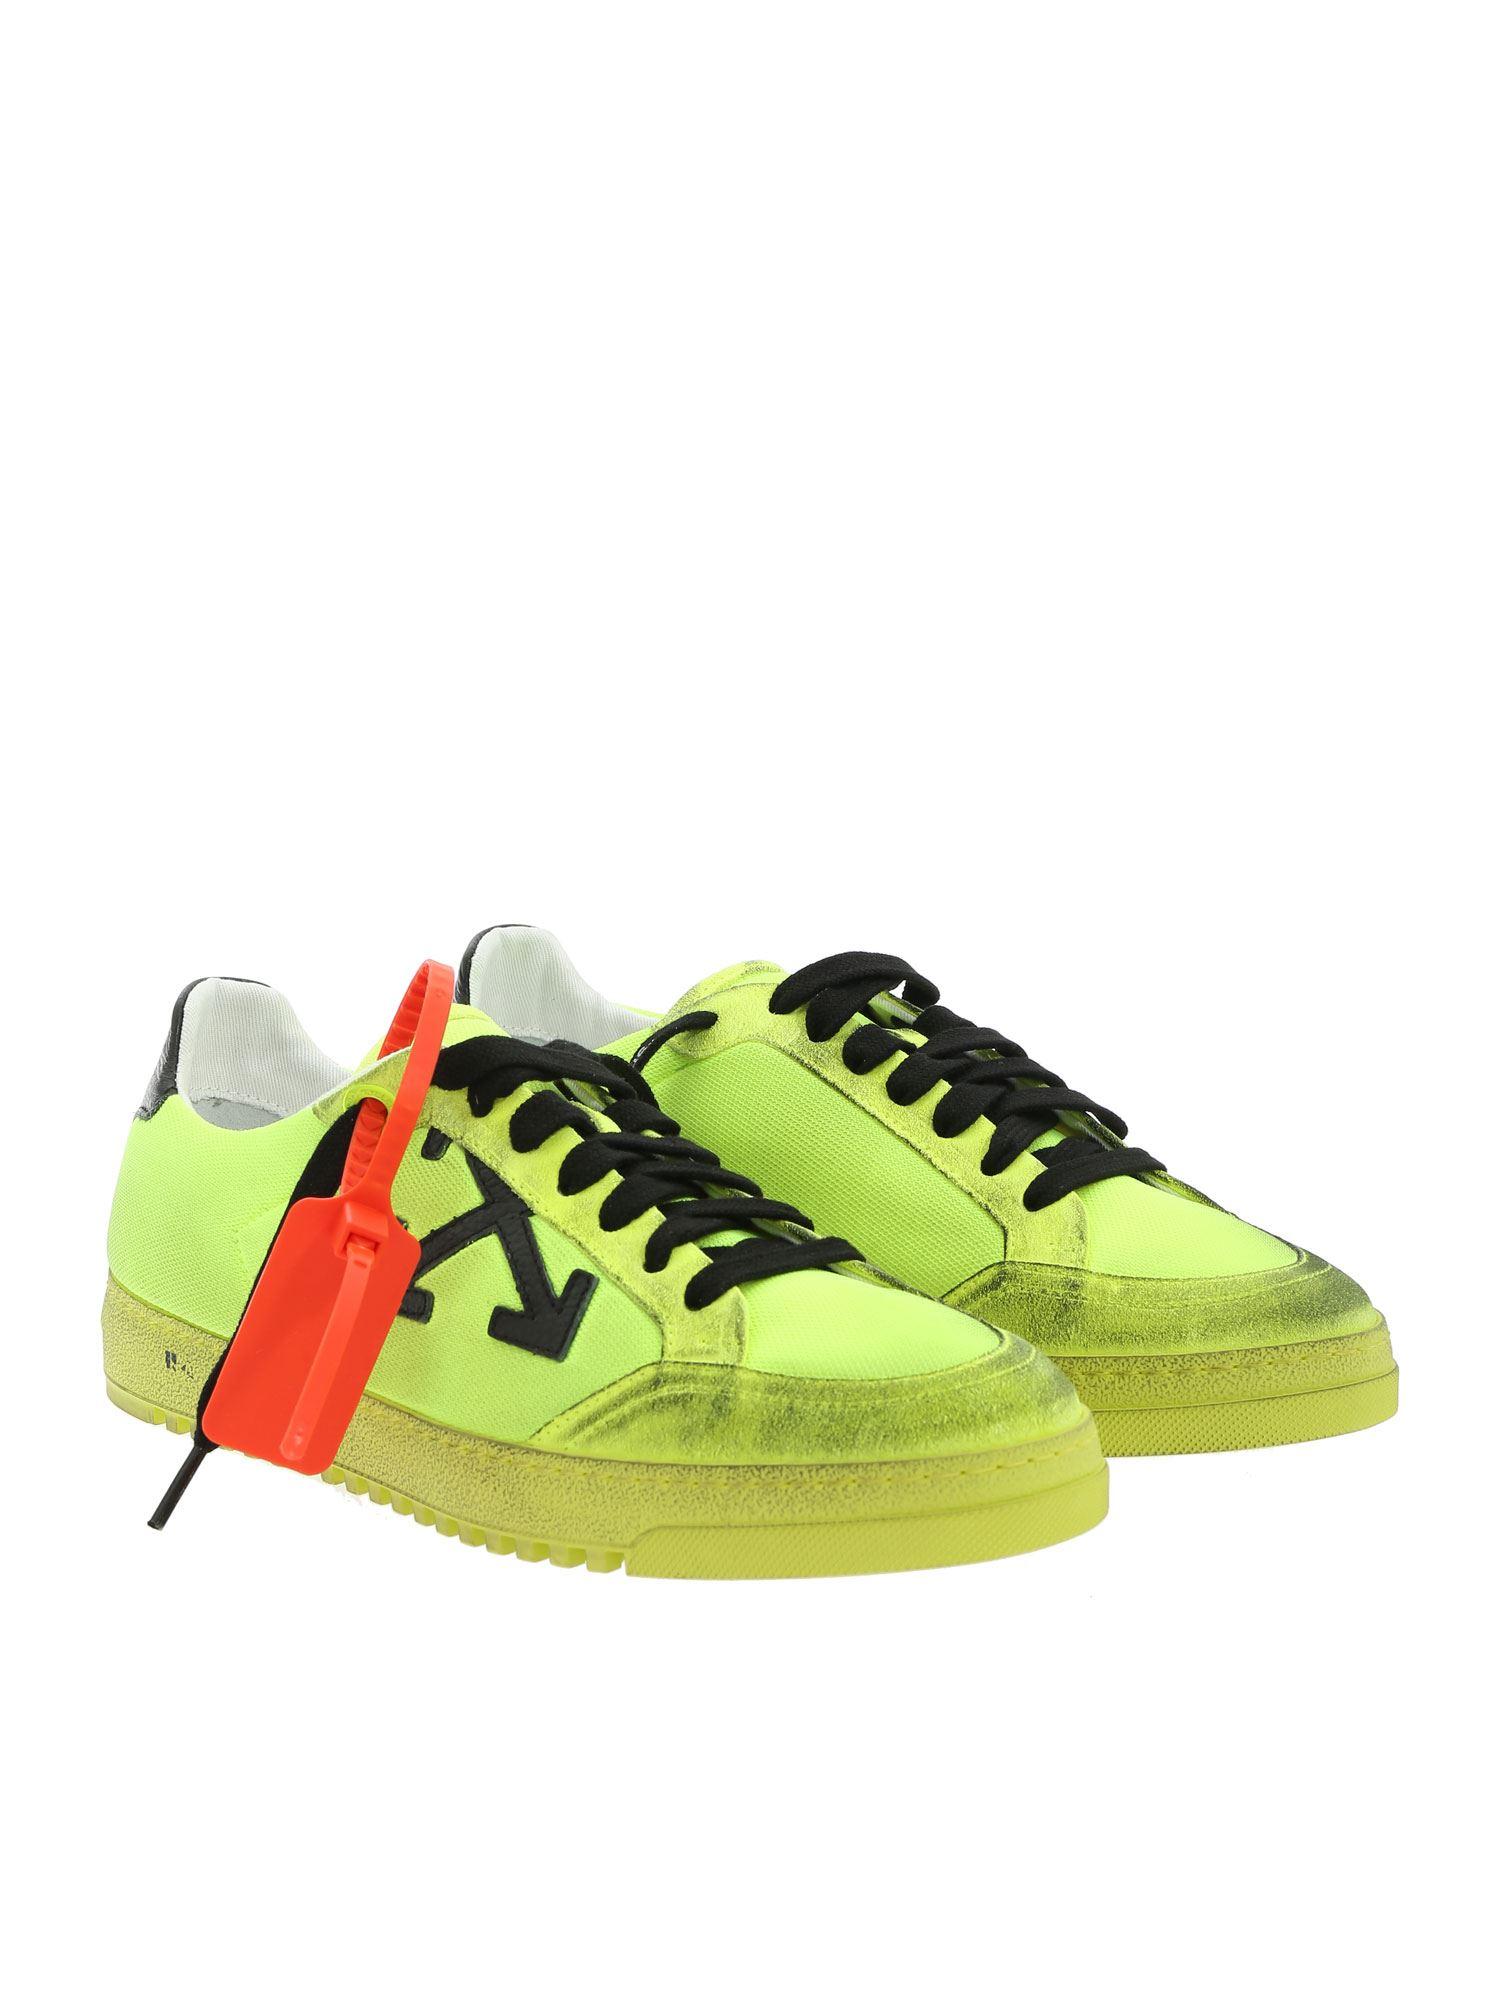 Off-White c/o Virgil Abloh 2.0 Sneakers In Neon Yellow in White for Men -  Lyst